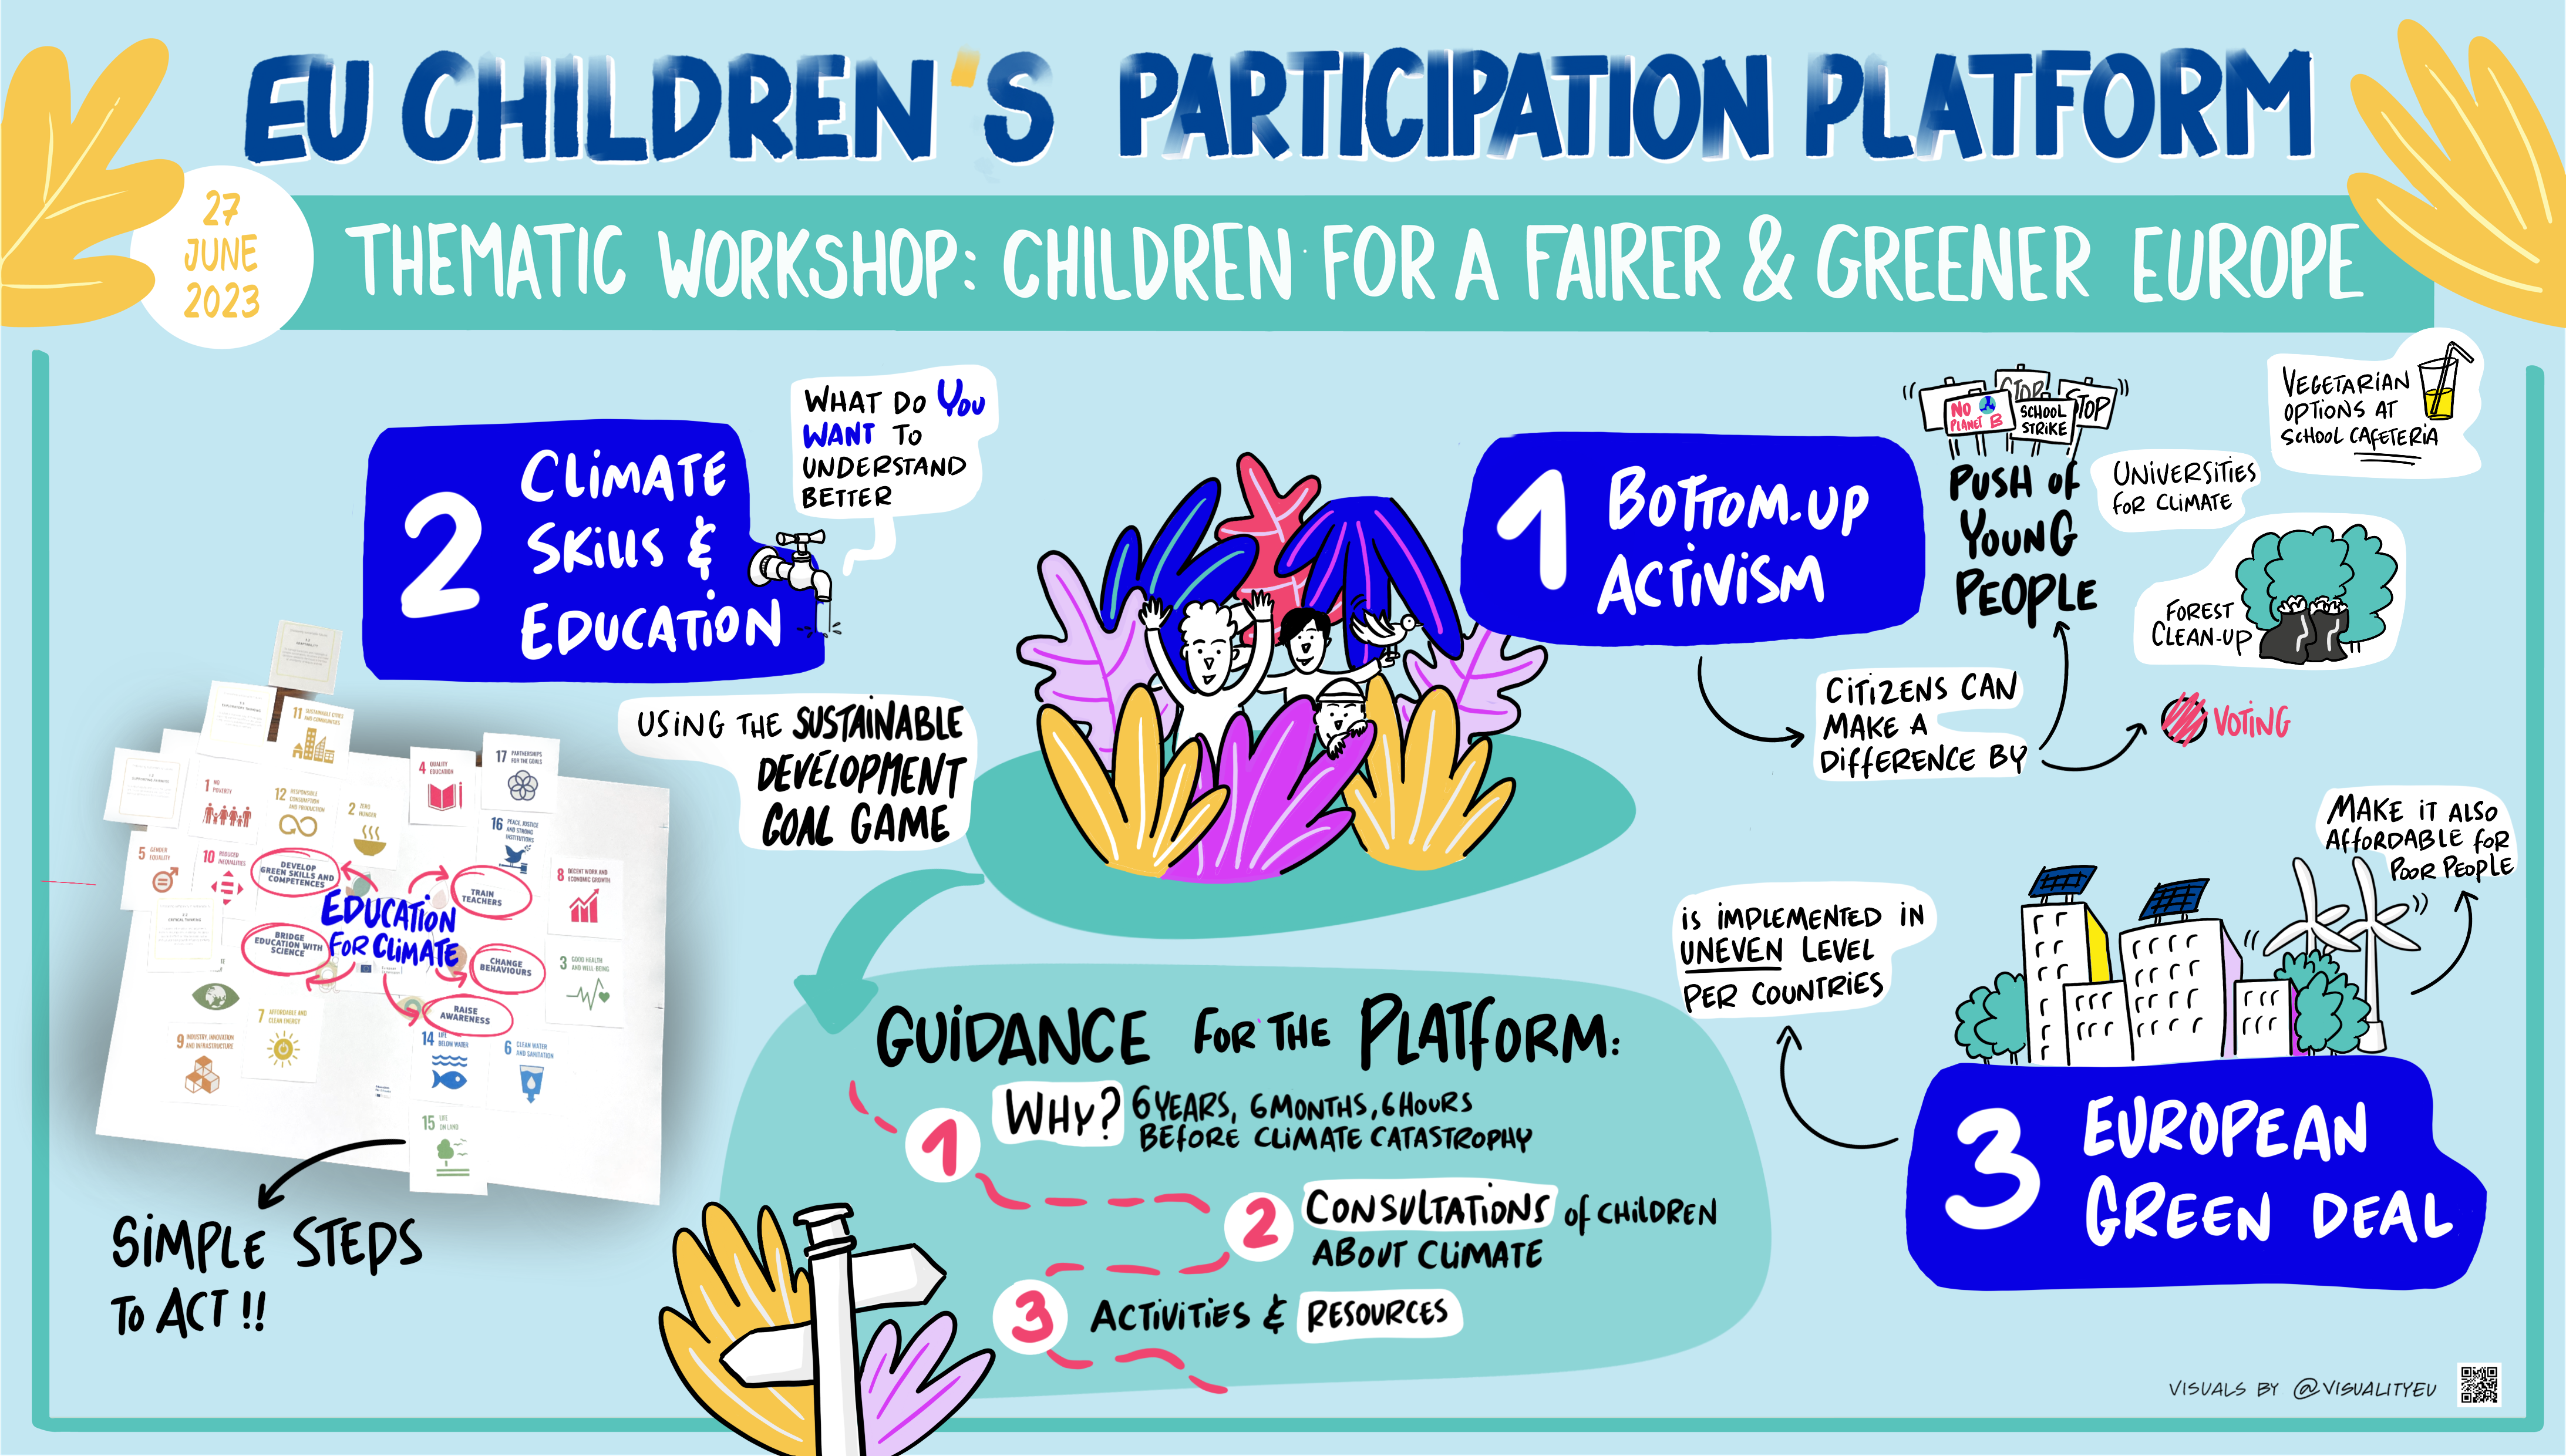 The graphic recording showcases young children engaging in various sustainable and educational activities, promoting a brighter and more environmentally conscious future for Europe.